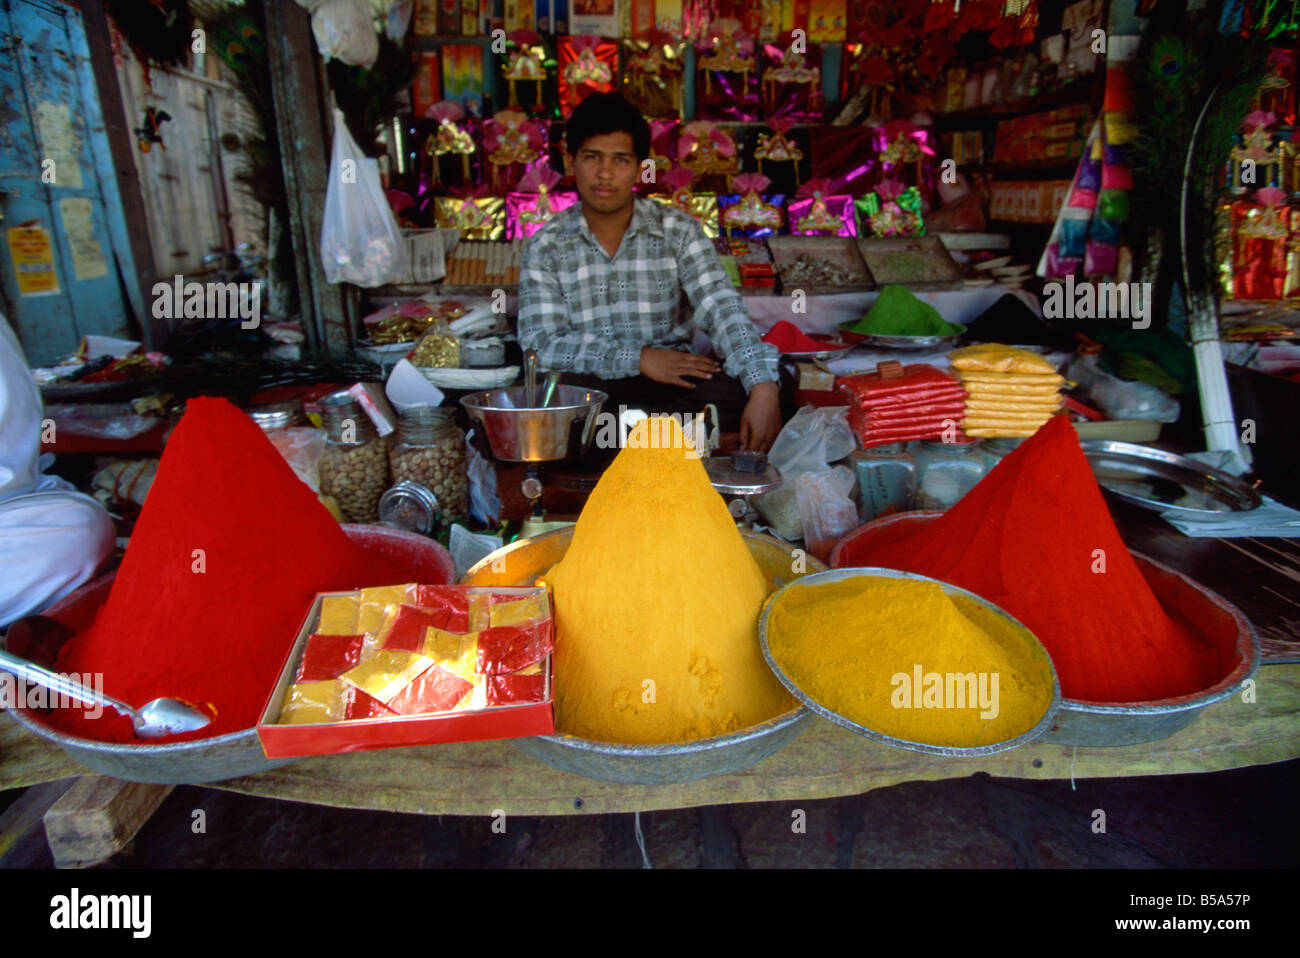 Yellow turmeric and red dye for sale, old town, Pune, Maharashtra state, India Stock Photo